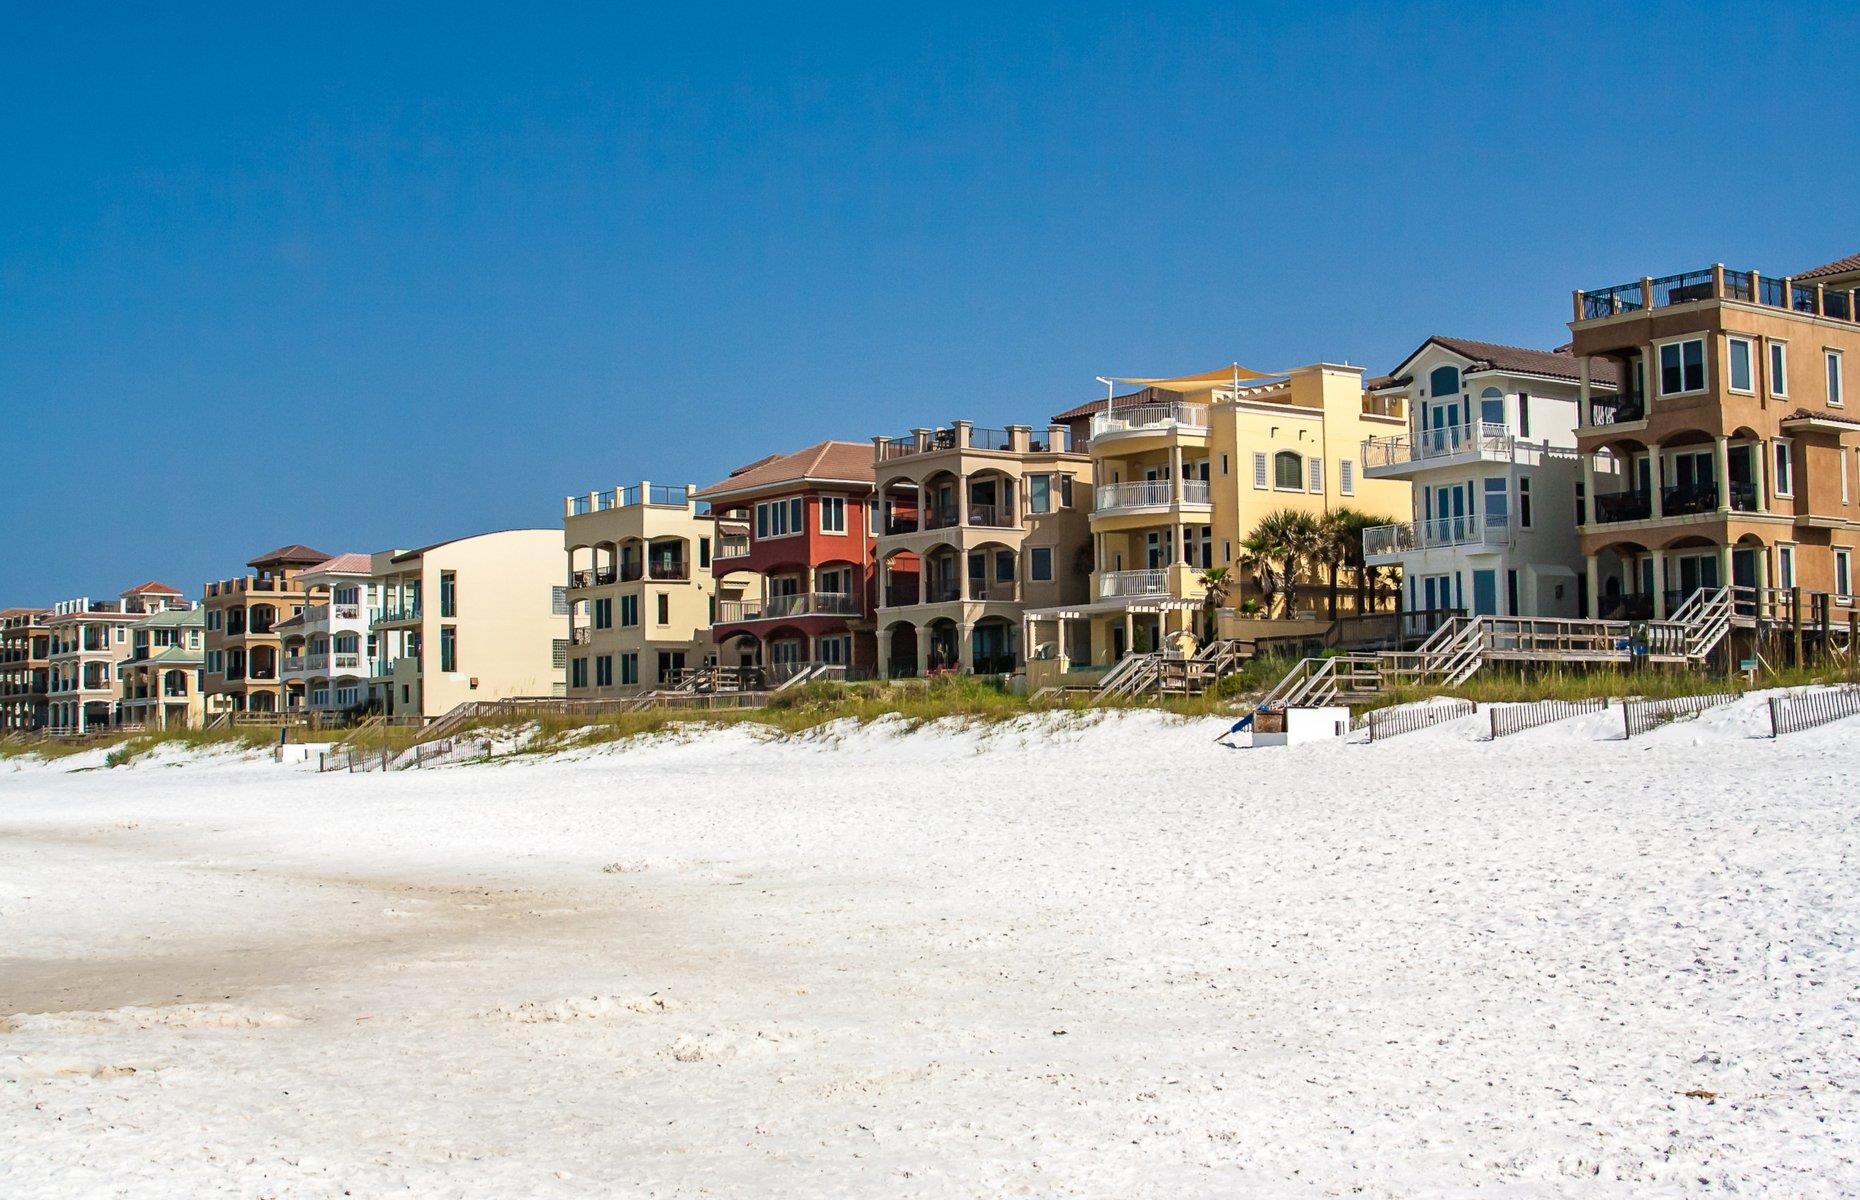 <p>Situated in the panhandle against the Gulf of Mexico, Destin’s pristine white beaches owe their trademark hue to tiny crystals of Appalachian quartz, which washed in during the last Ice Age. Yet there’s plenty more to discover besides: from fishing in clear waters to eating fresh seafood in local restaurants, or taking a peek at the luxurious condos lining the shore. Despite being a popular resort, Destin’s permanent population is small at just 13,000 and the town has kept its friendly, community feel.</p>